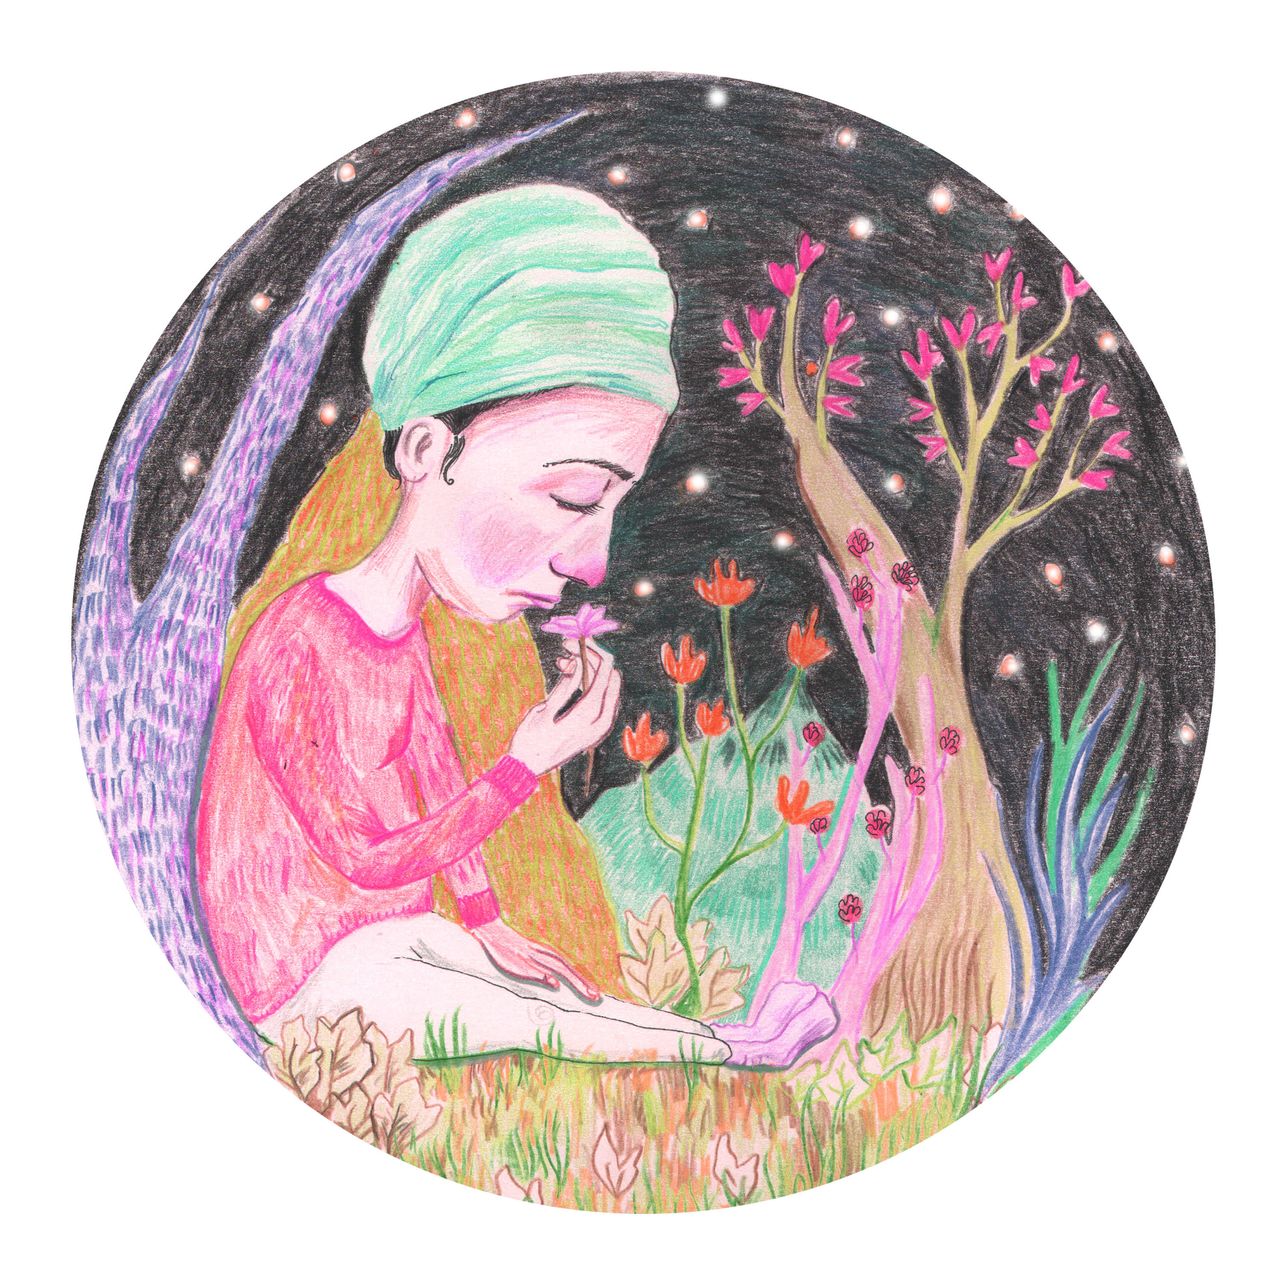 Sikh artist Baljinder Kaur explores themes of identity, faith and daily life in her work.